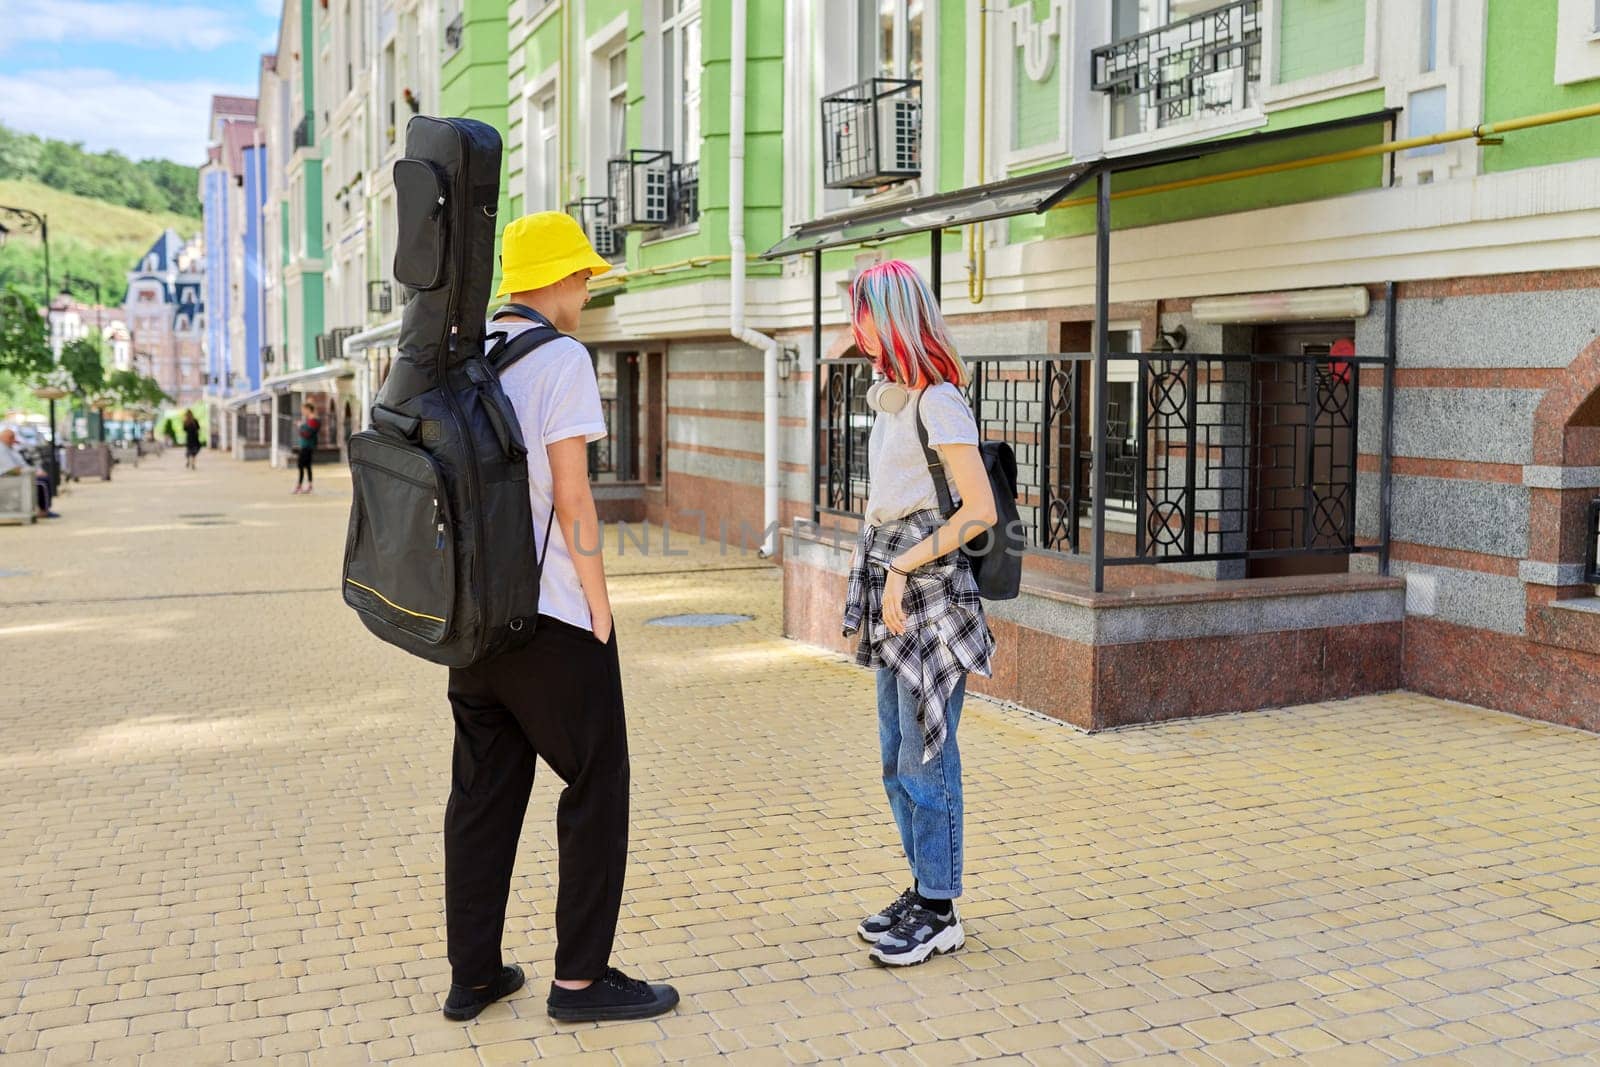 Trendy teenage hipsters boy and girl walking talking on city street, boy with guitar in case. Youth, lifestyle, creativity, communication, friendship concept